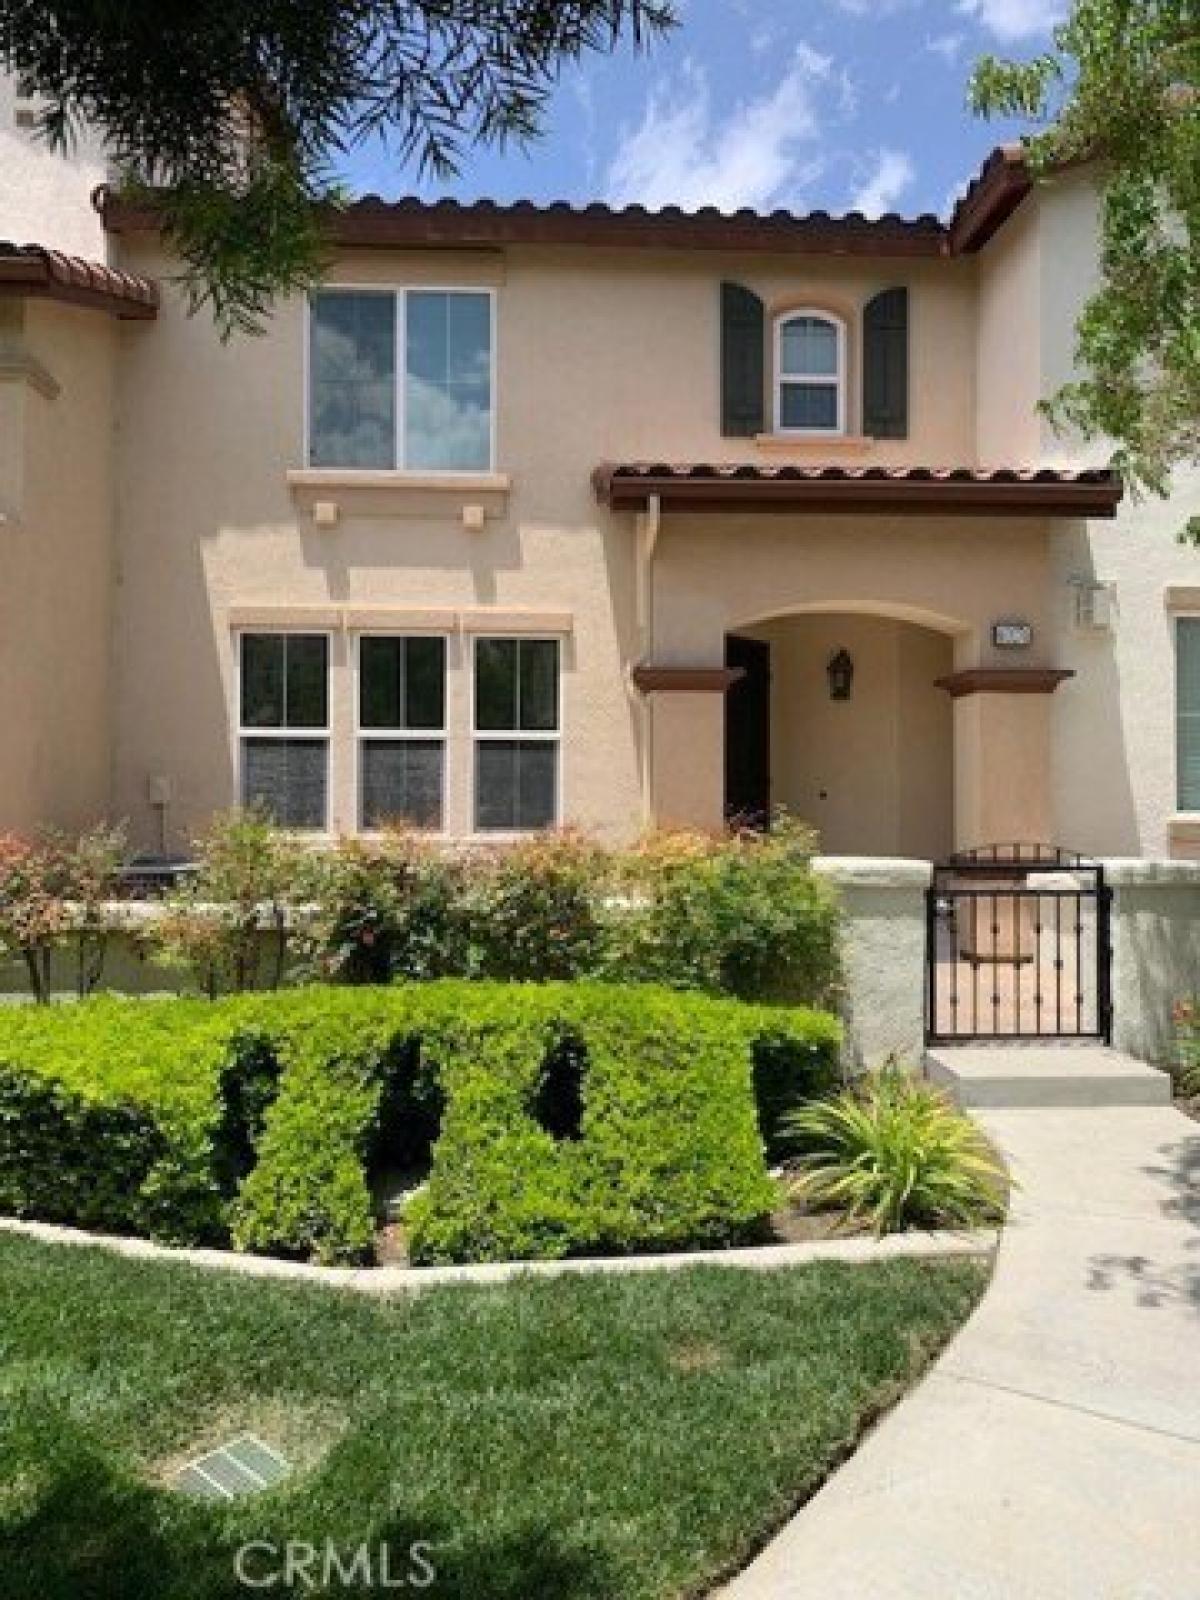 Picture of Home For Rent in Temecula, California, United States